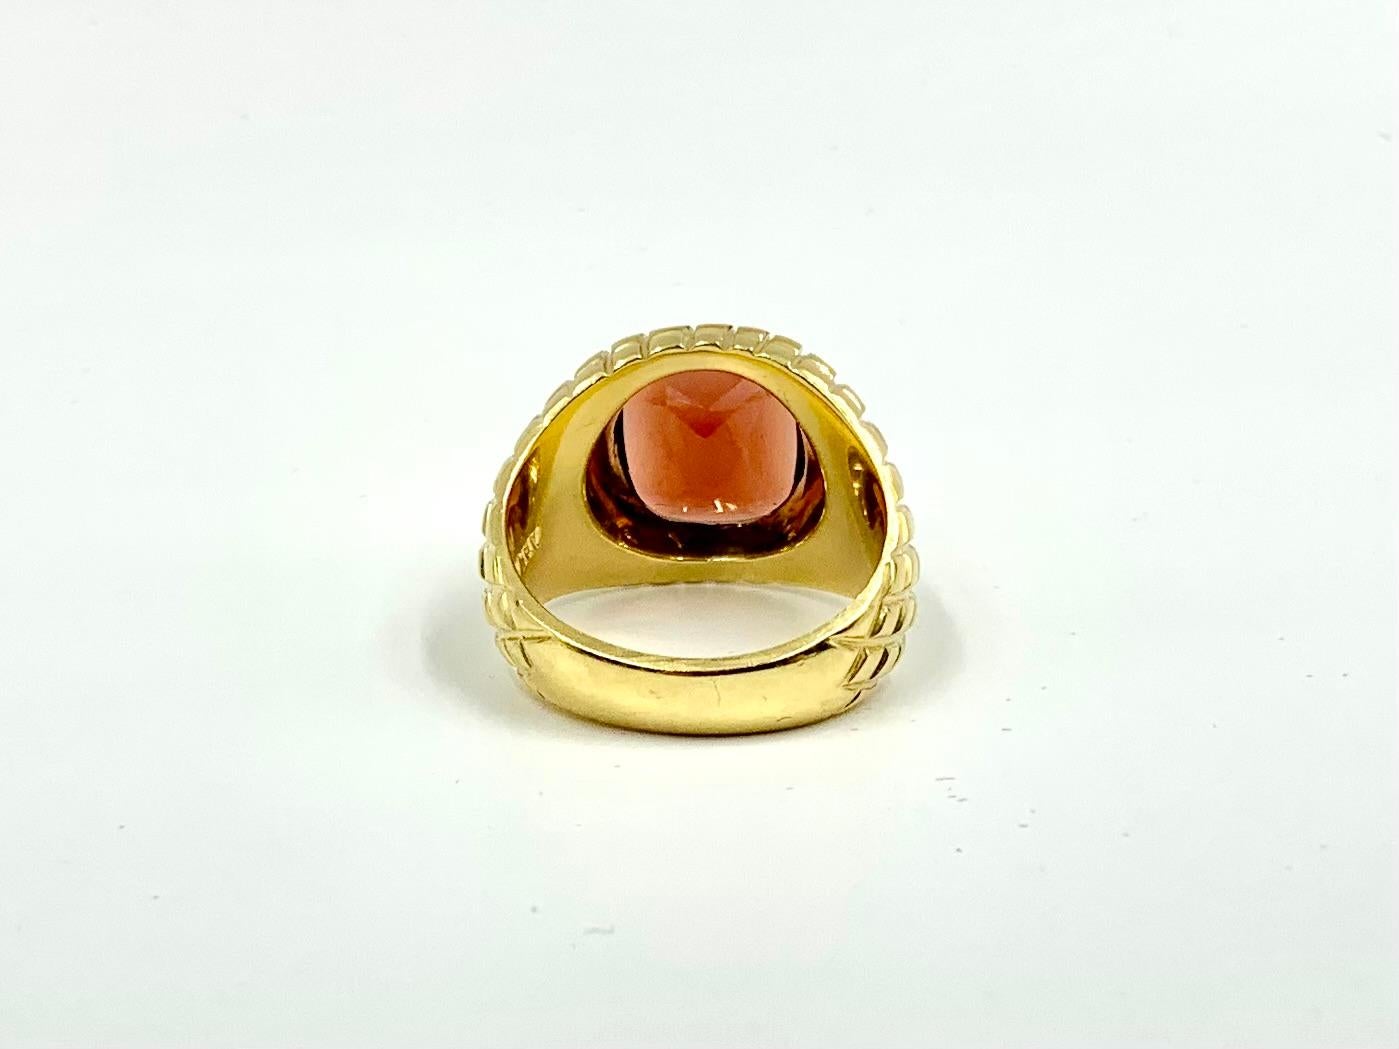 Substantial 18K Yellow Gold Rhodolite Garnet Signet Ring by ABL In Good Condition For Sale In New York, NY